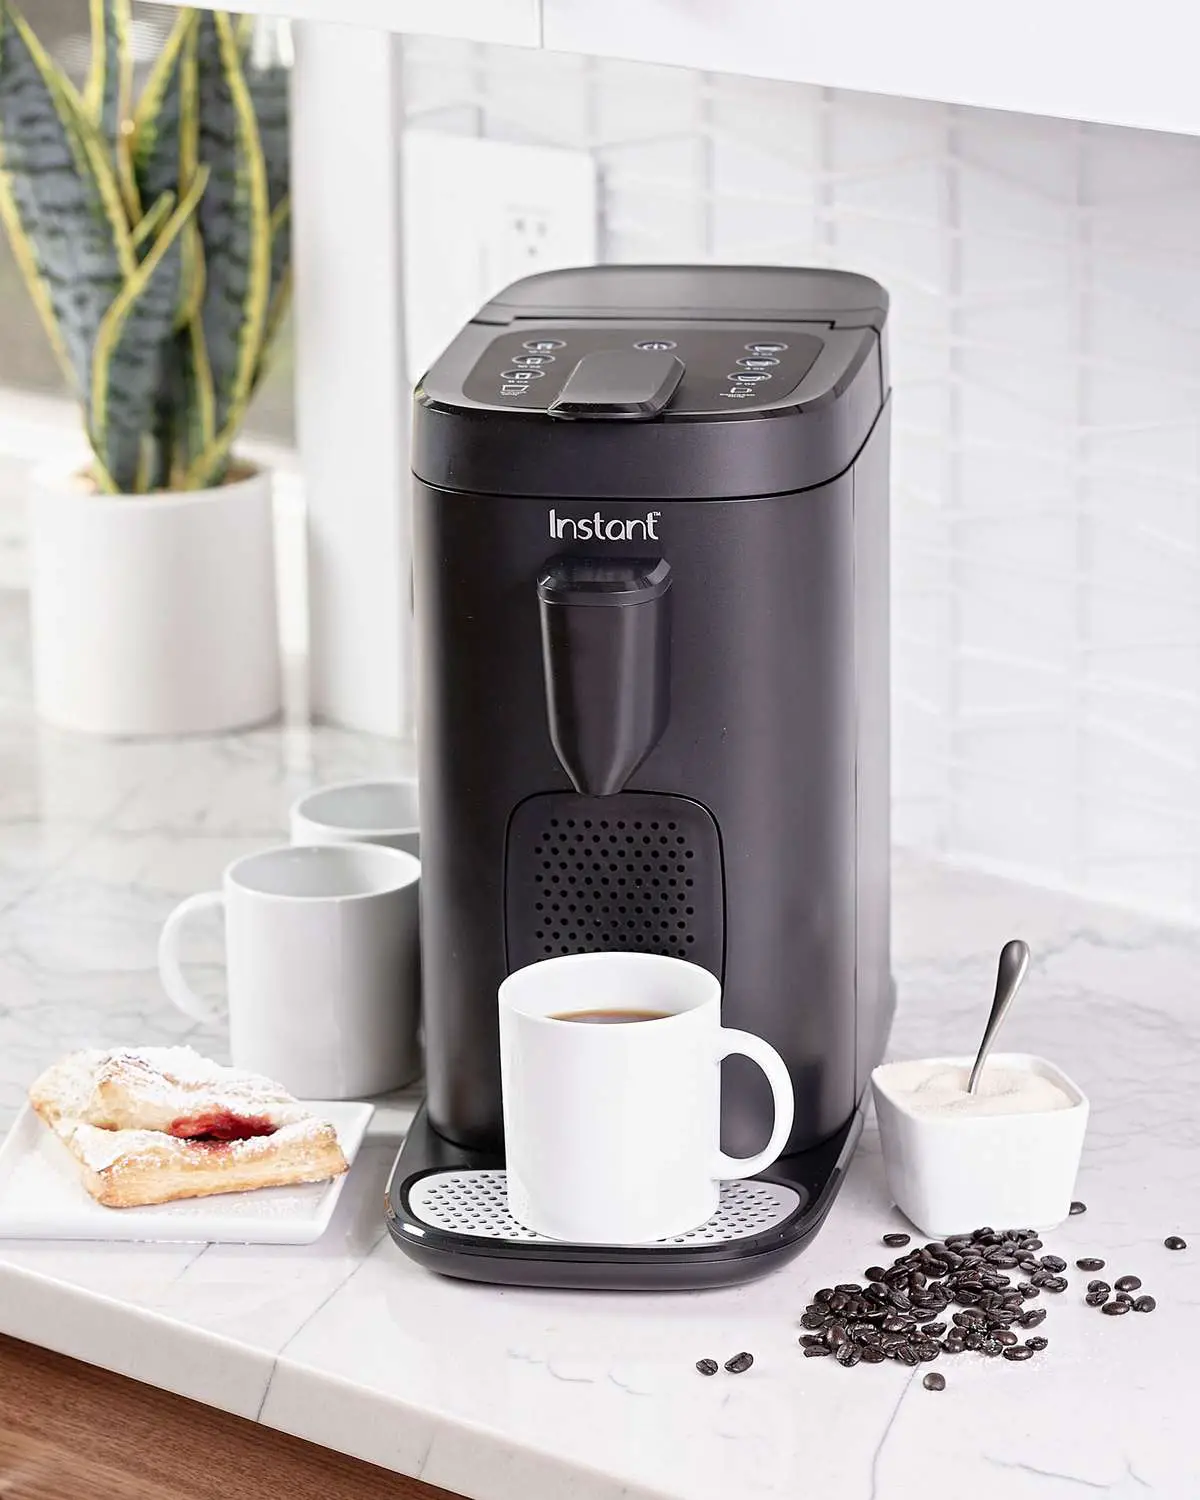 Instant Pot Just Released a Coffee Maker: the Instant Pod